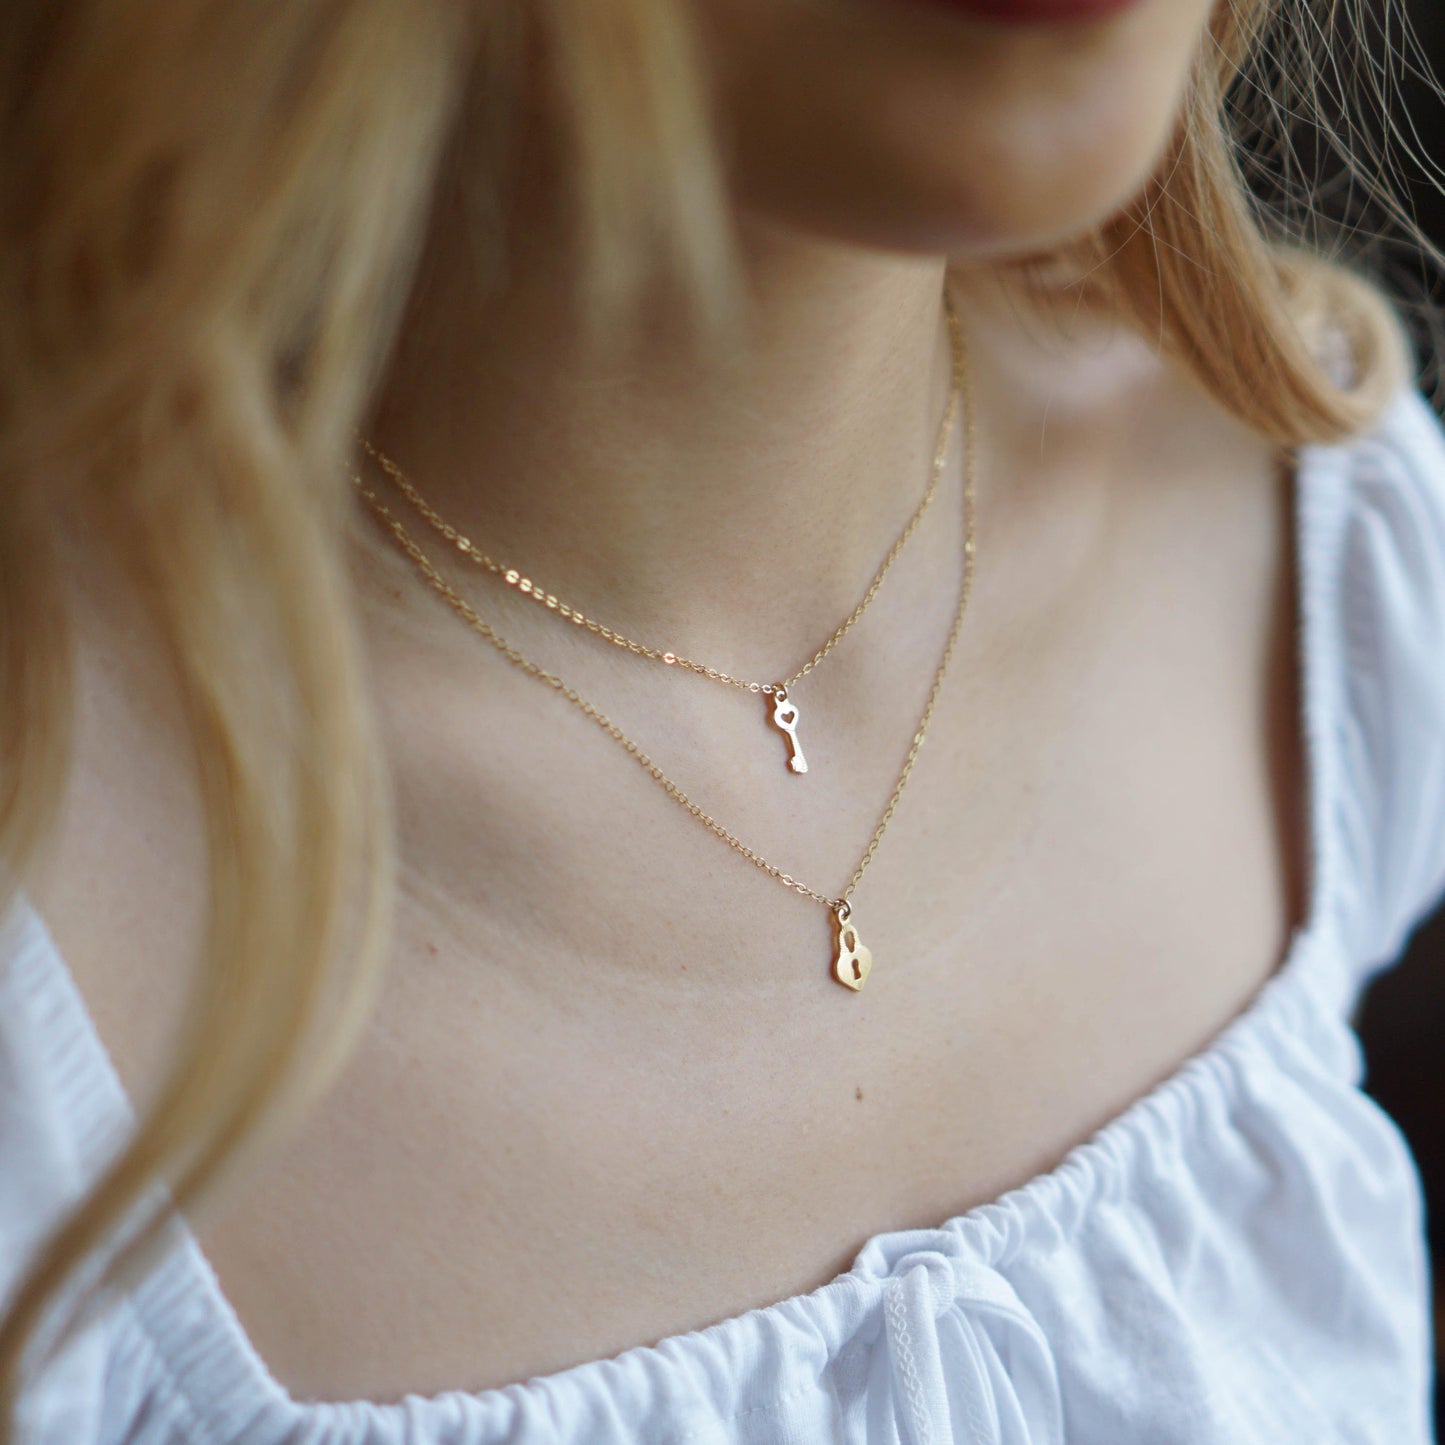 Heart Lock and Key Layered Necklace - 14K Gold Filled - Studdedheartz